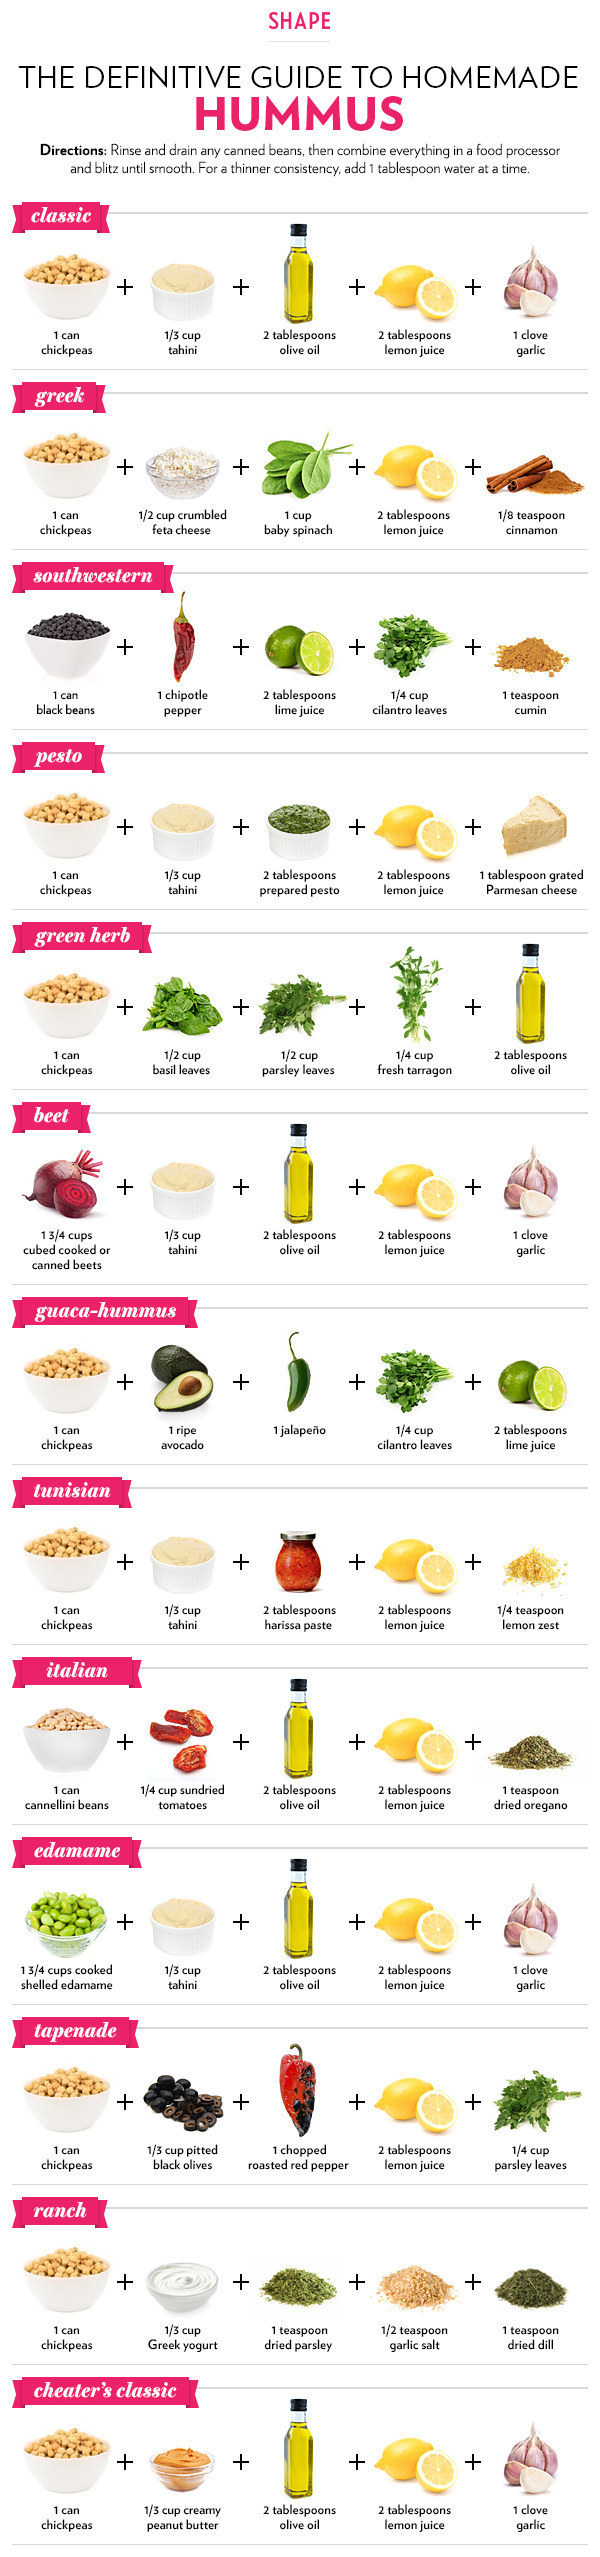 Get creative with hummus as another way to add protein and iron to your diet.